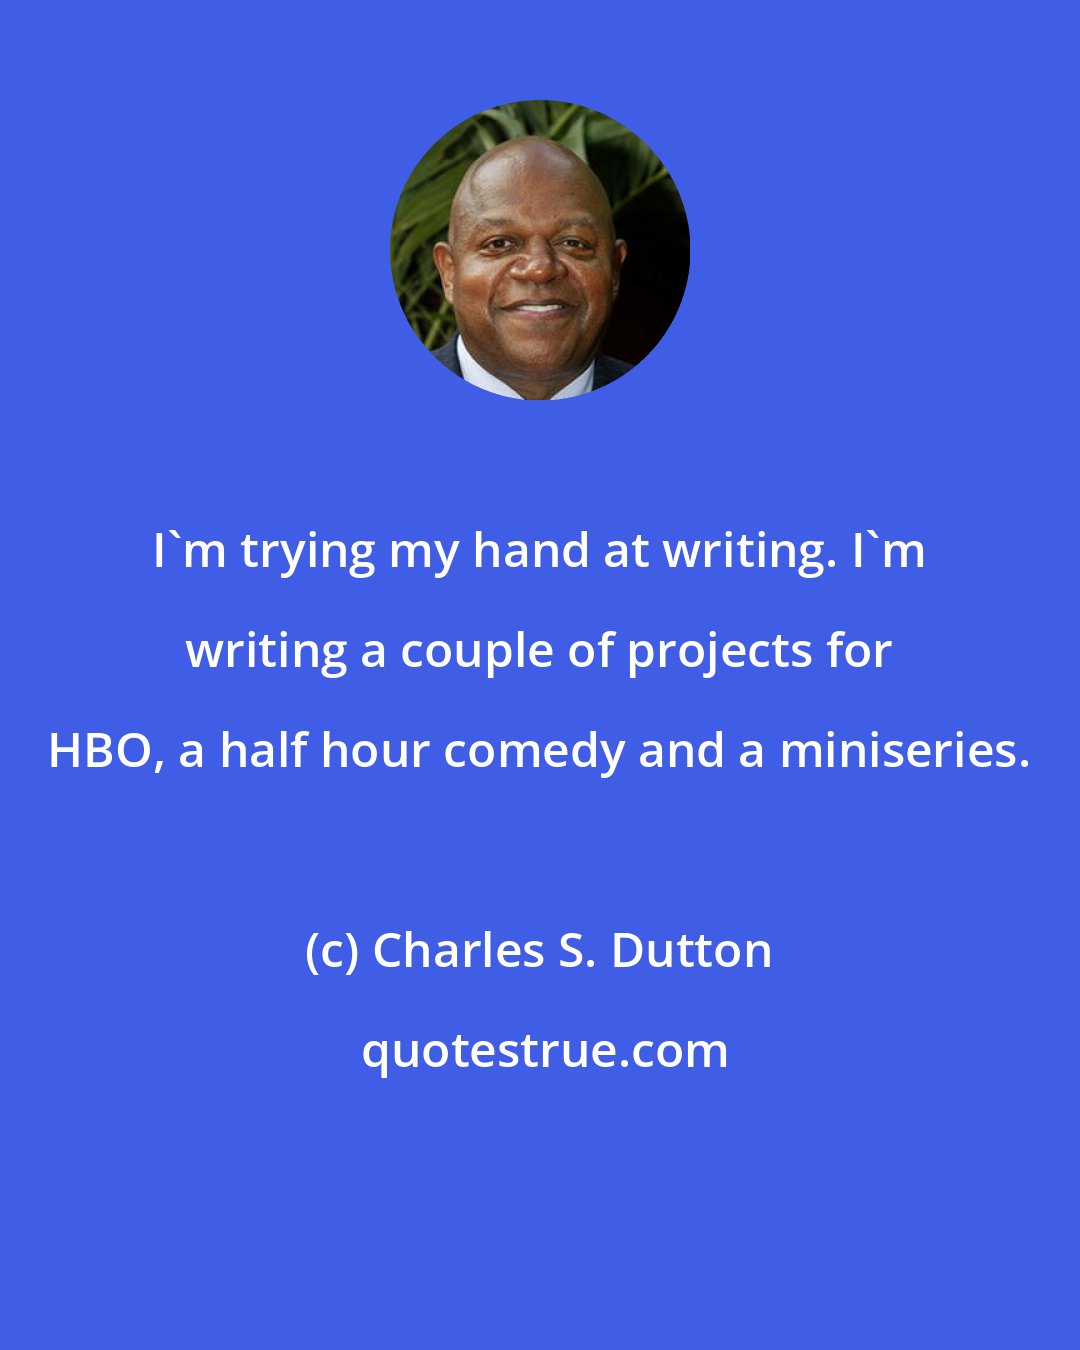 Charles S. Dutton: I'm trying my hand at writing. I'm writing a couple of projects for HBO, a half hour comedy and a miniseries.